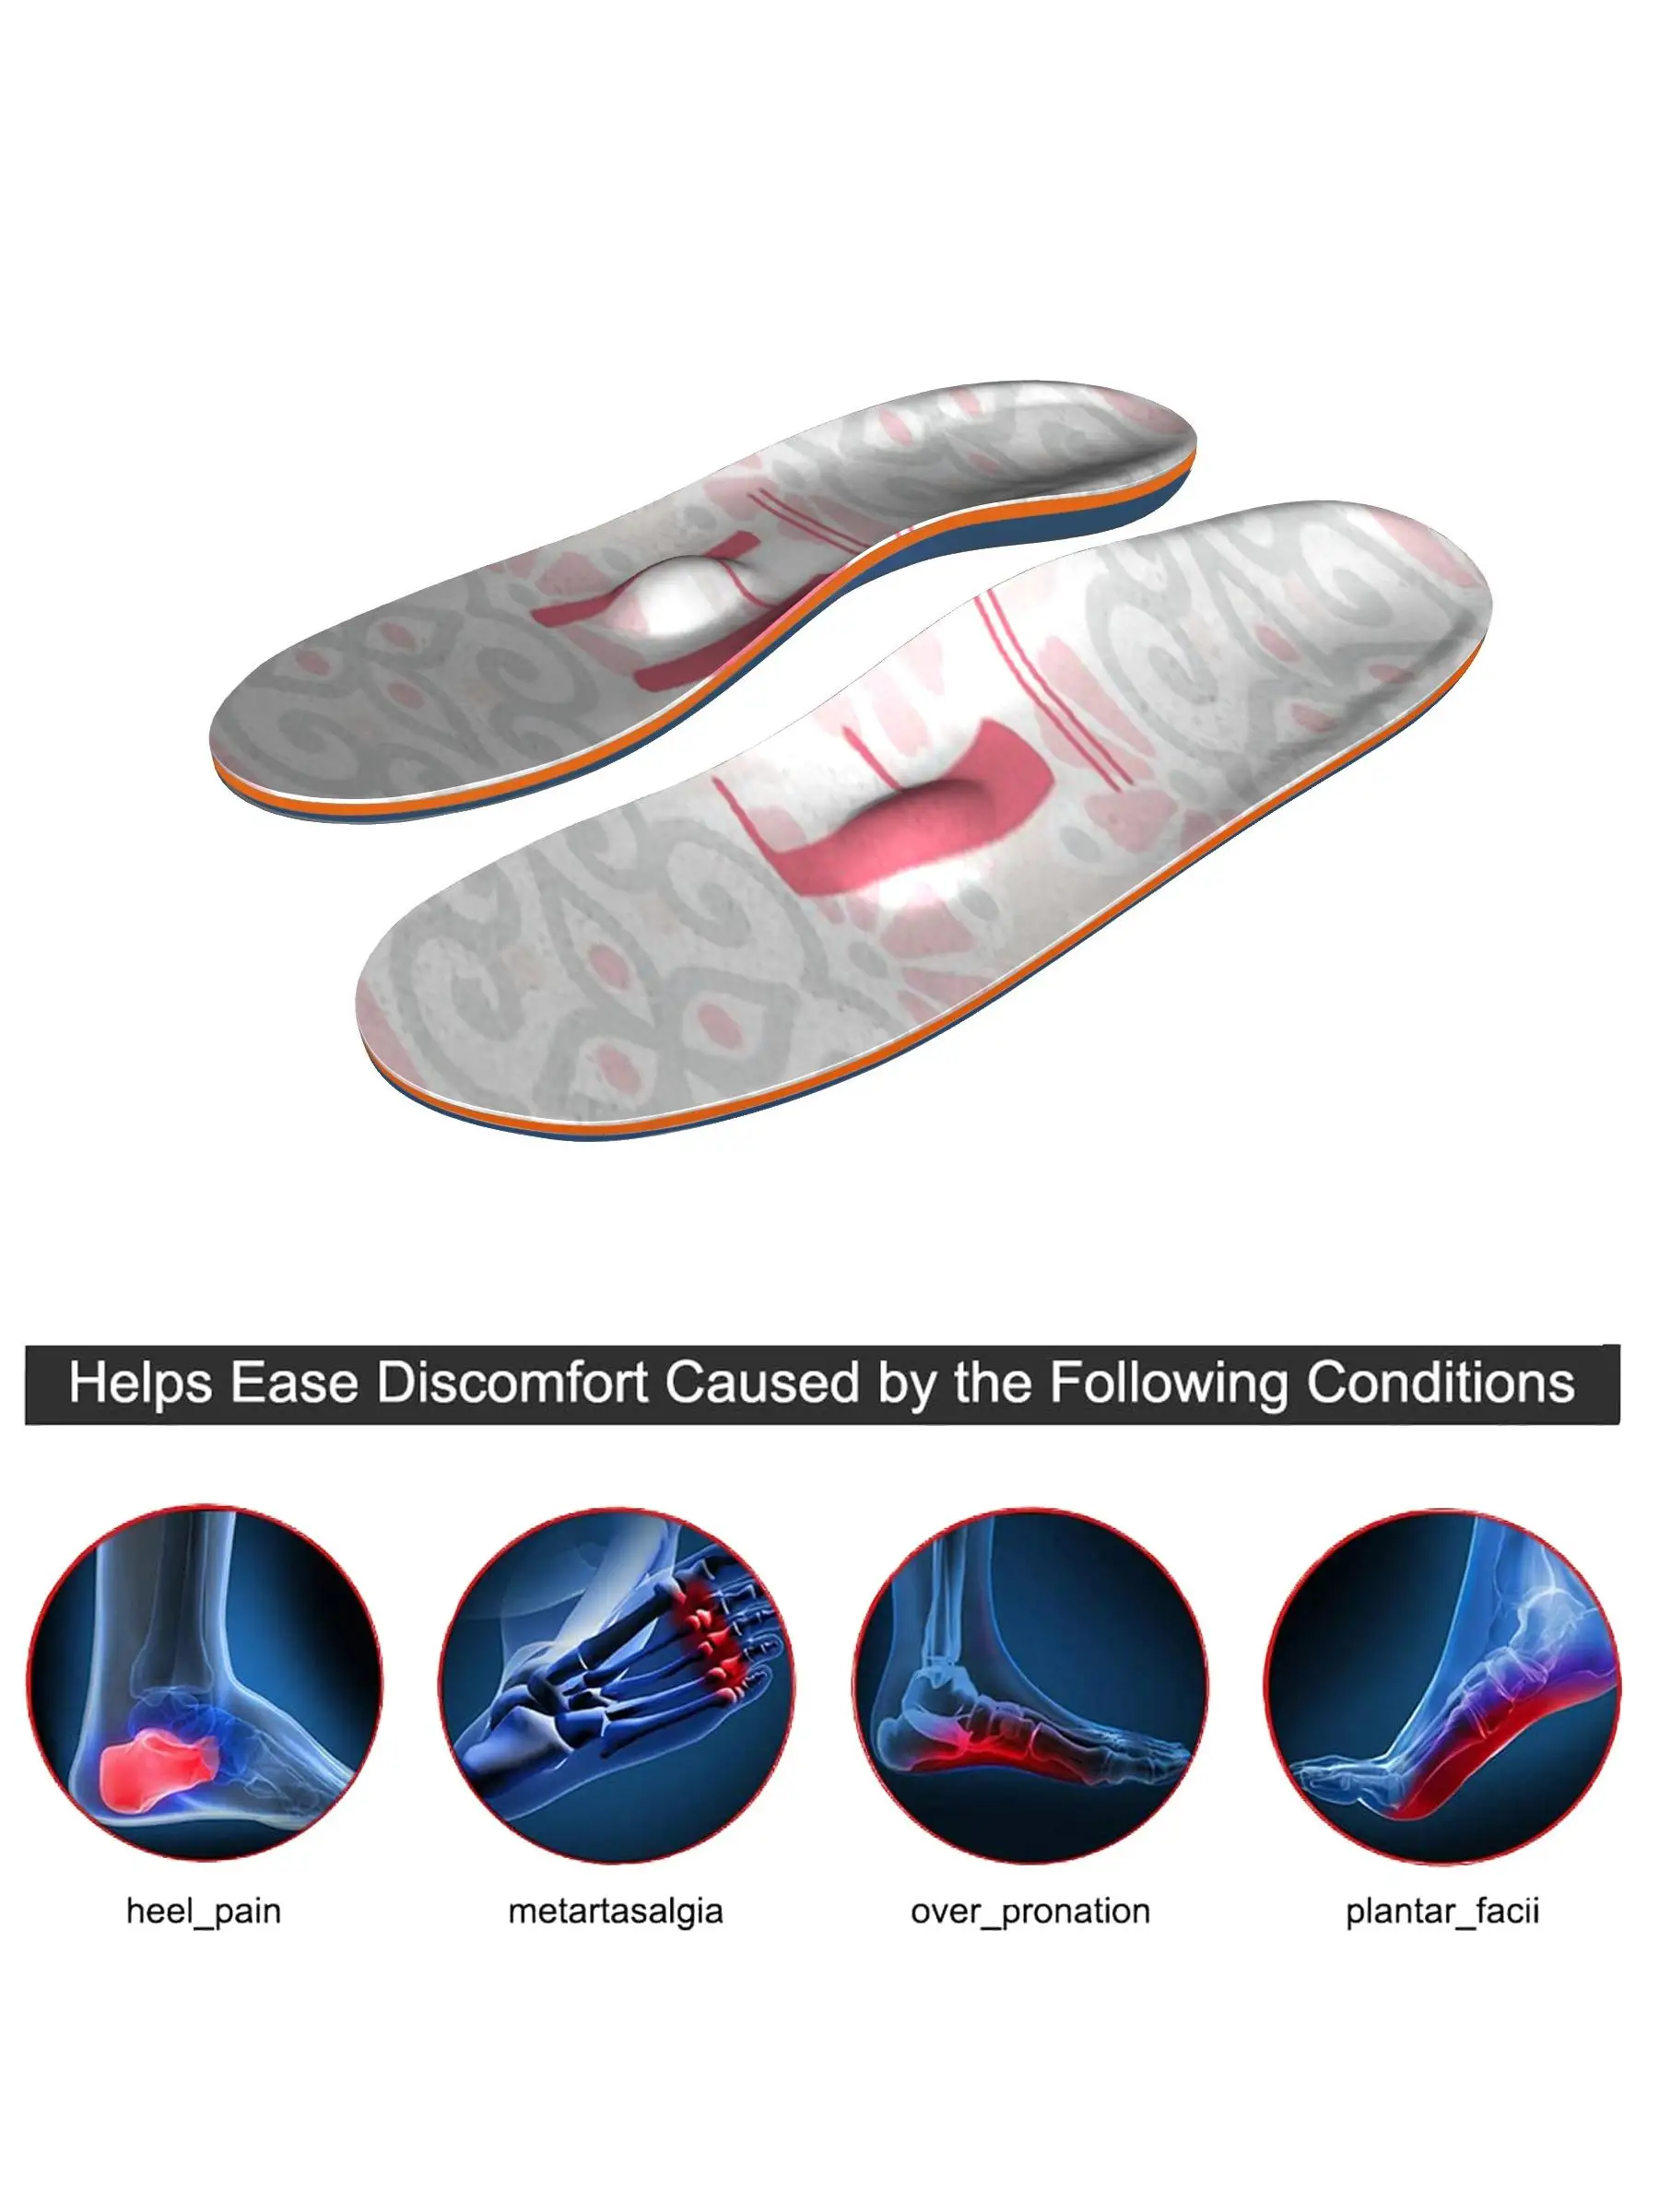 Advanced customization plantar fasciitis foot pad flat foot high arch support orthopedic insole new men's and women's sports run